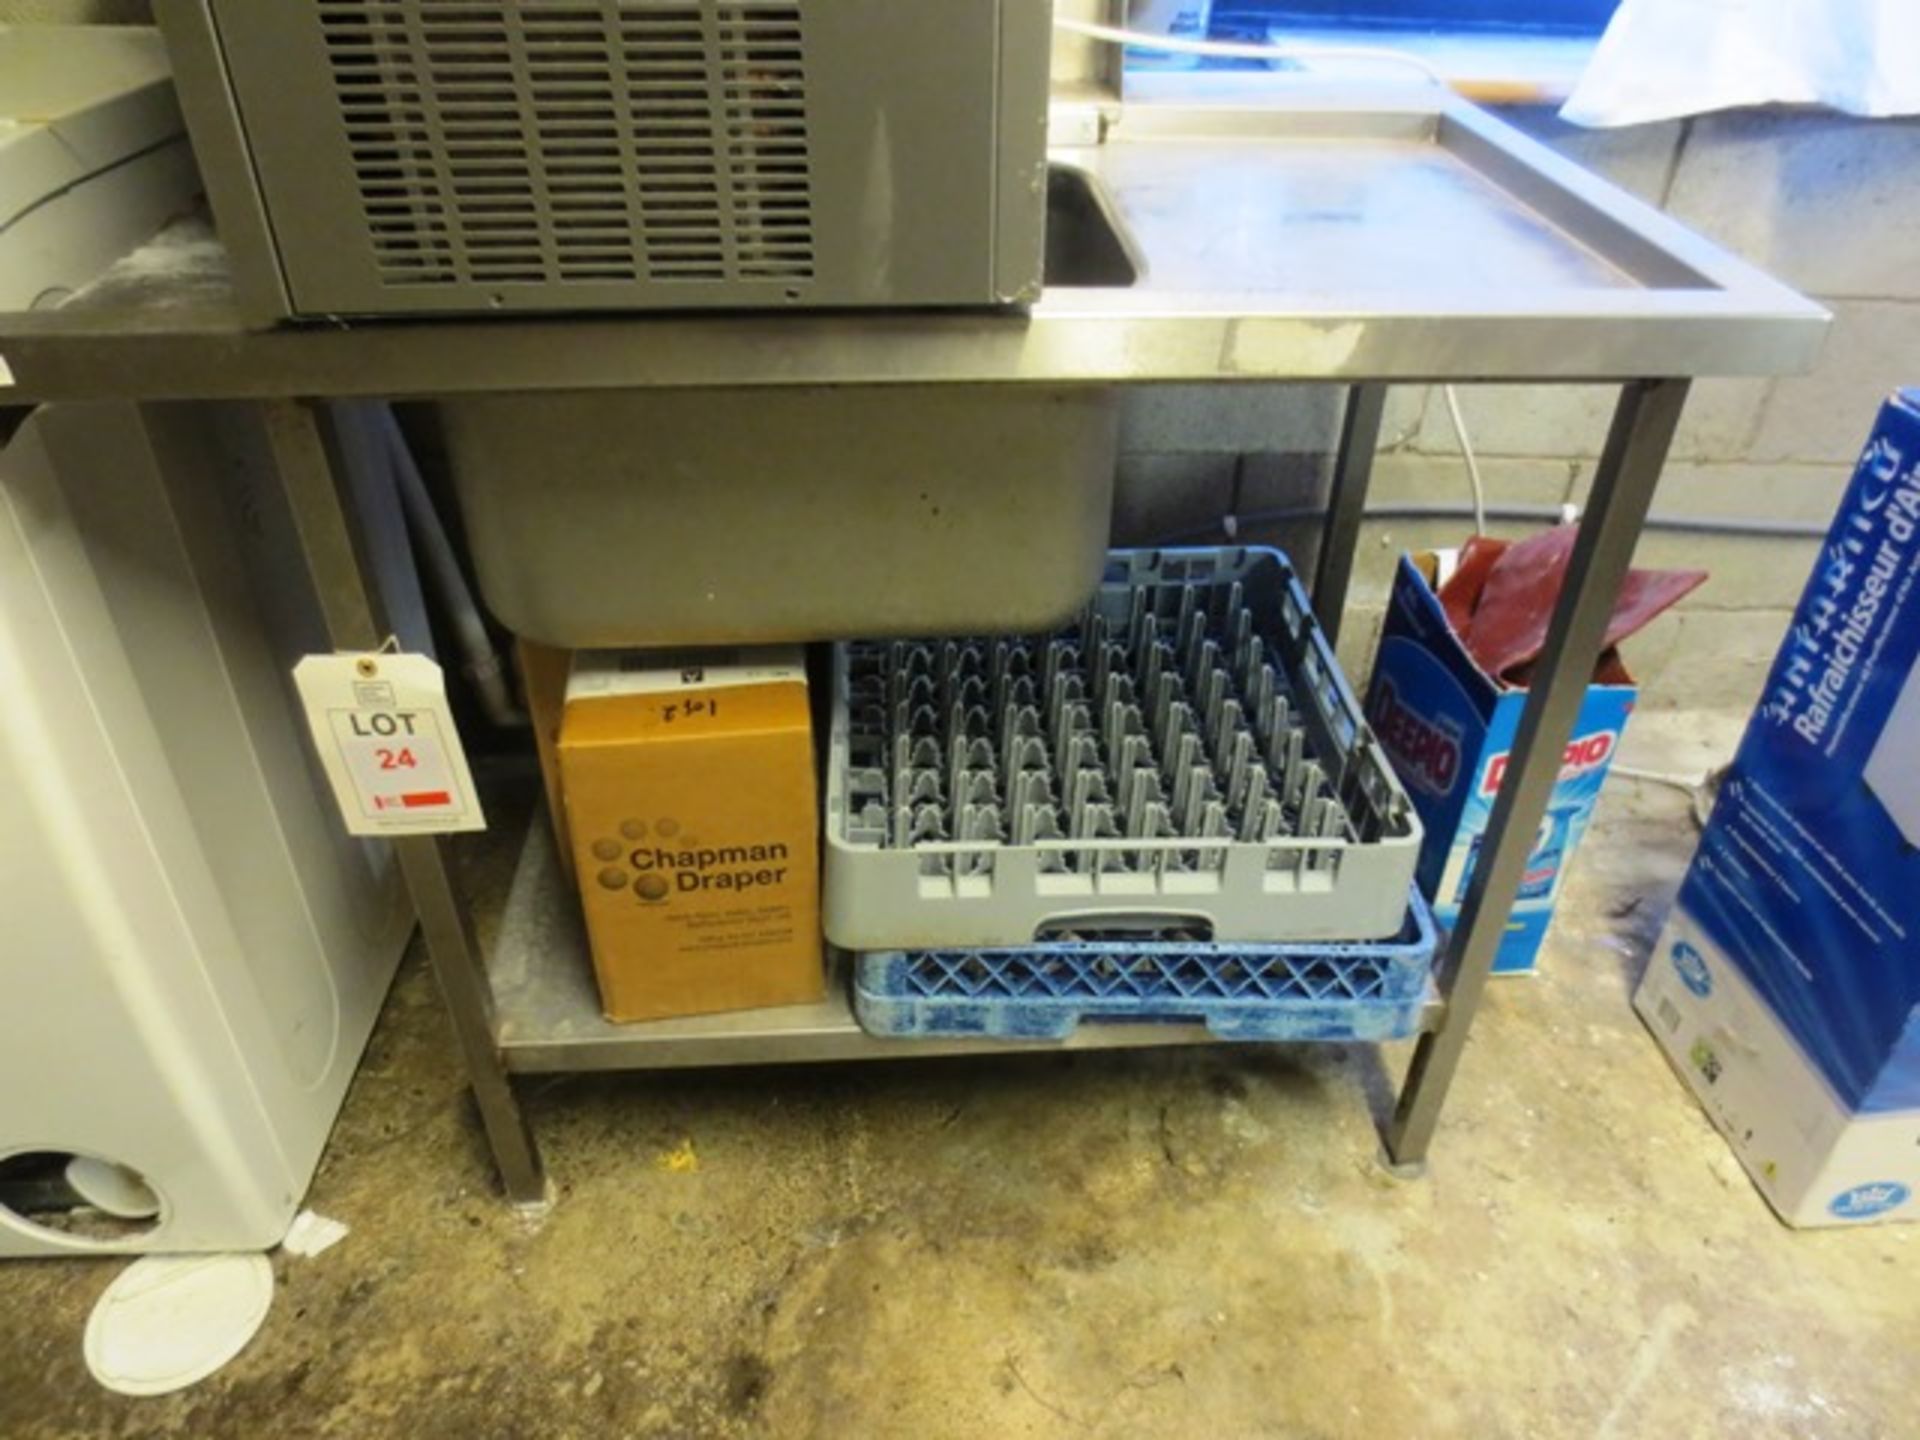 Stainless steel single sink unit with under counter shelf, approx dimensions: 1100 x 750mm